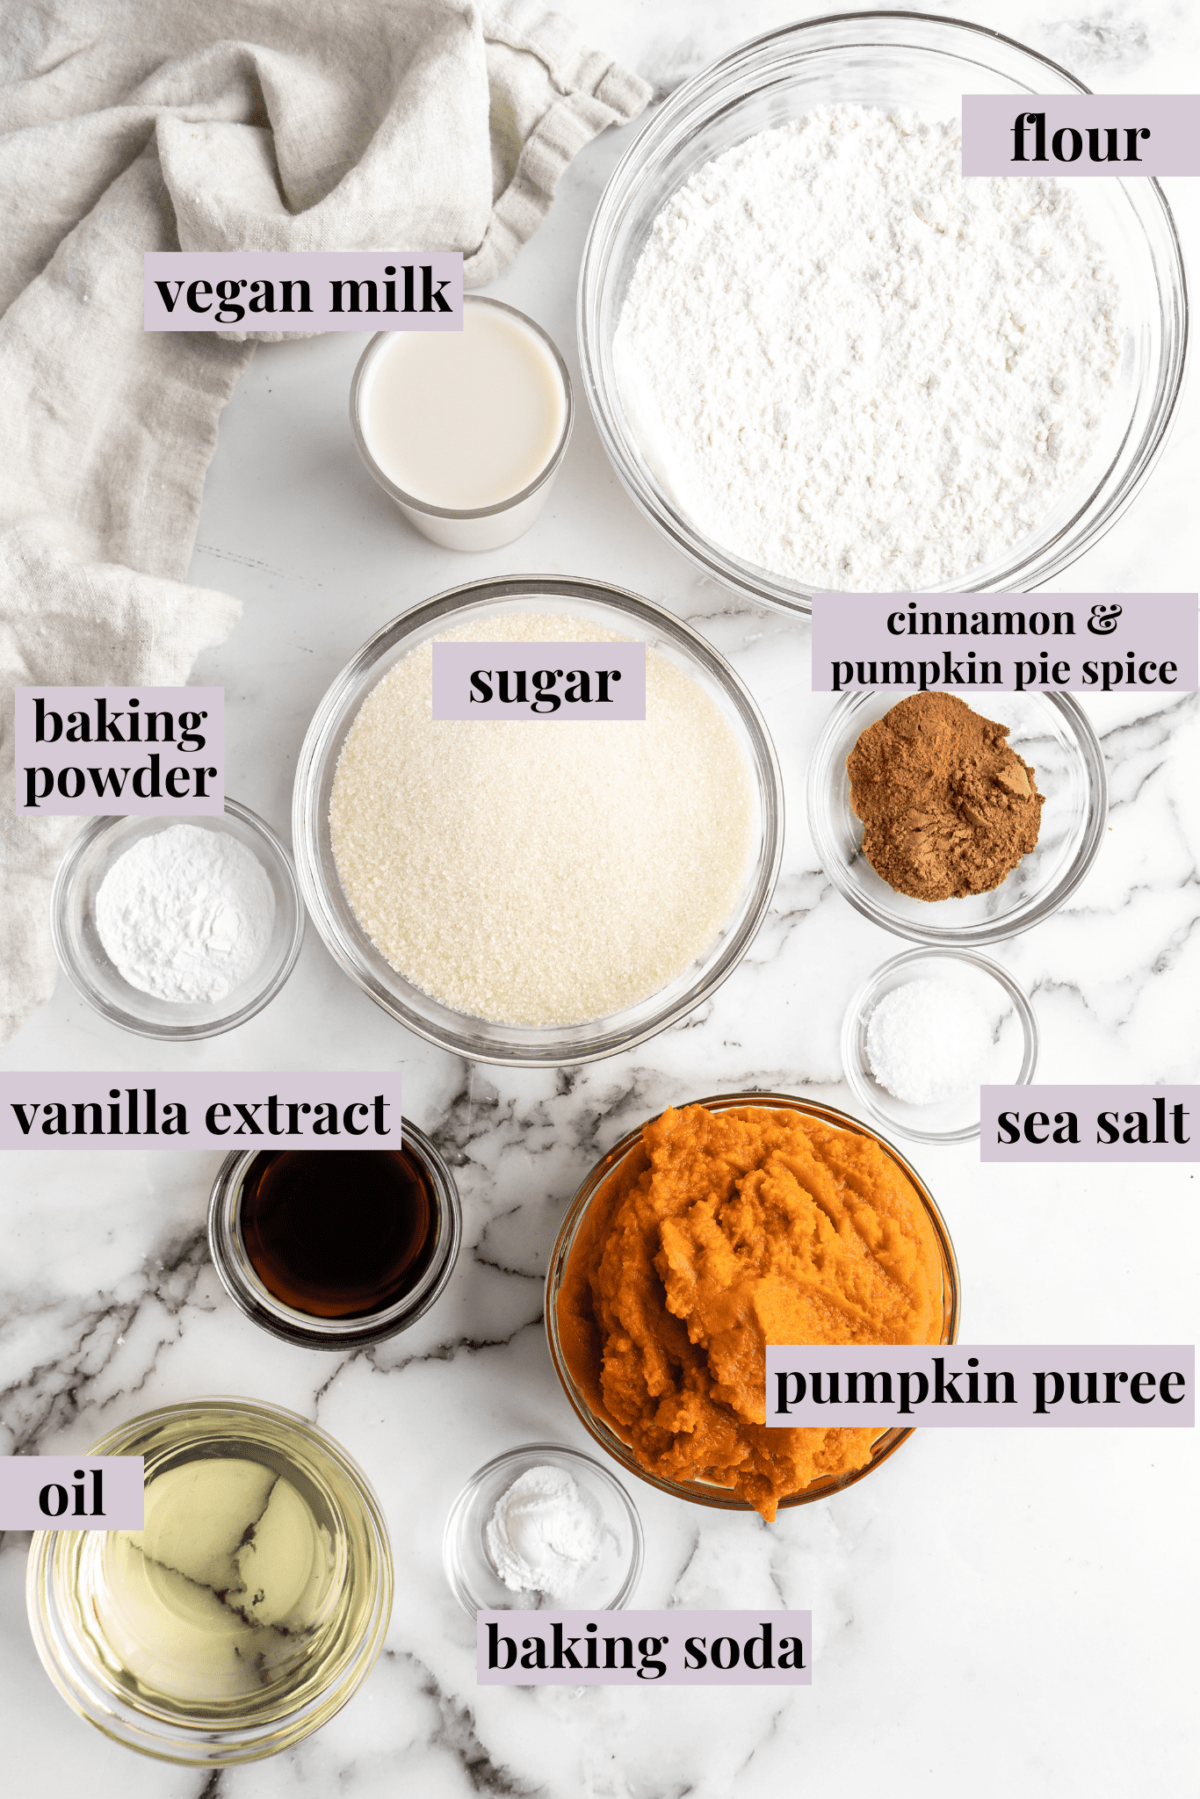 Overhead view of the labeled ingredients for pumpkin cupcakes: a bowl of flour, a bowl of sugar, a bowl of pumpkin puree, a bowl of vanilla extract, a bowl of sea salt, a bowl of baking powder, a bowl of baking soda, a bowl of vegan milk, a bowl of oil, and a bowl of cinnamon and pumpkin pie spice.